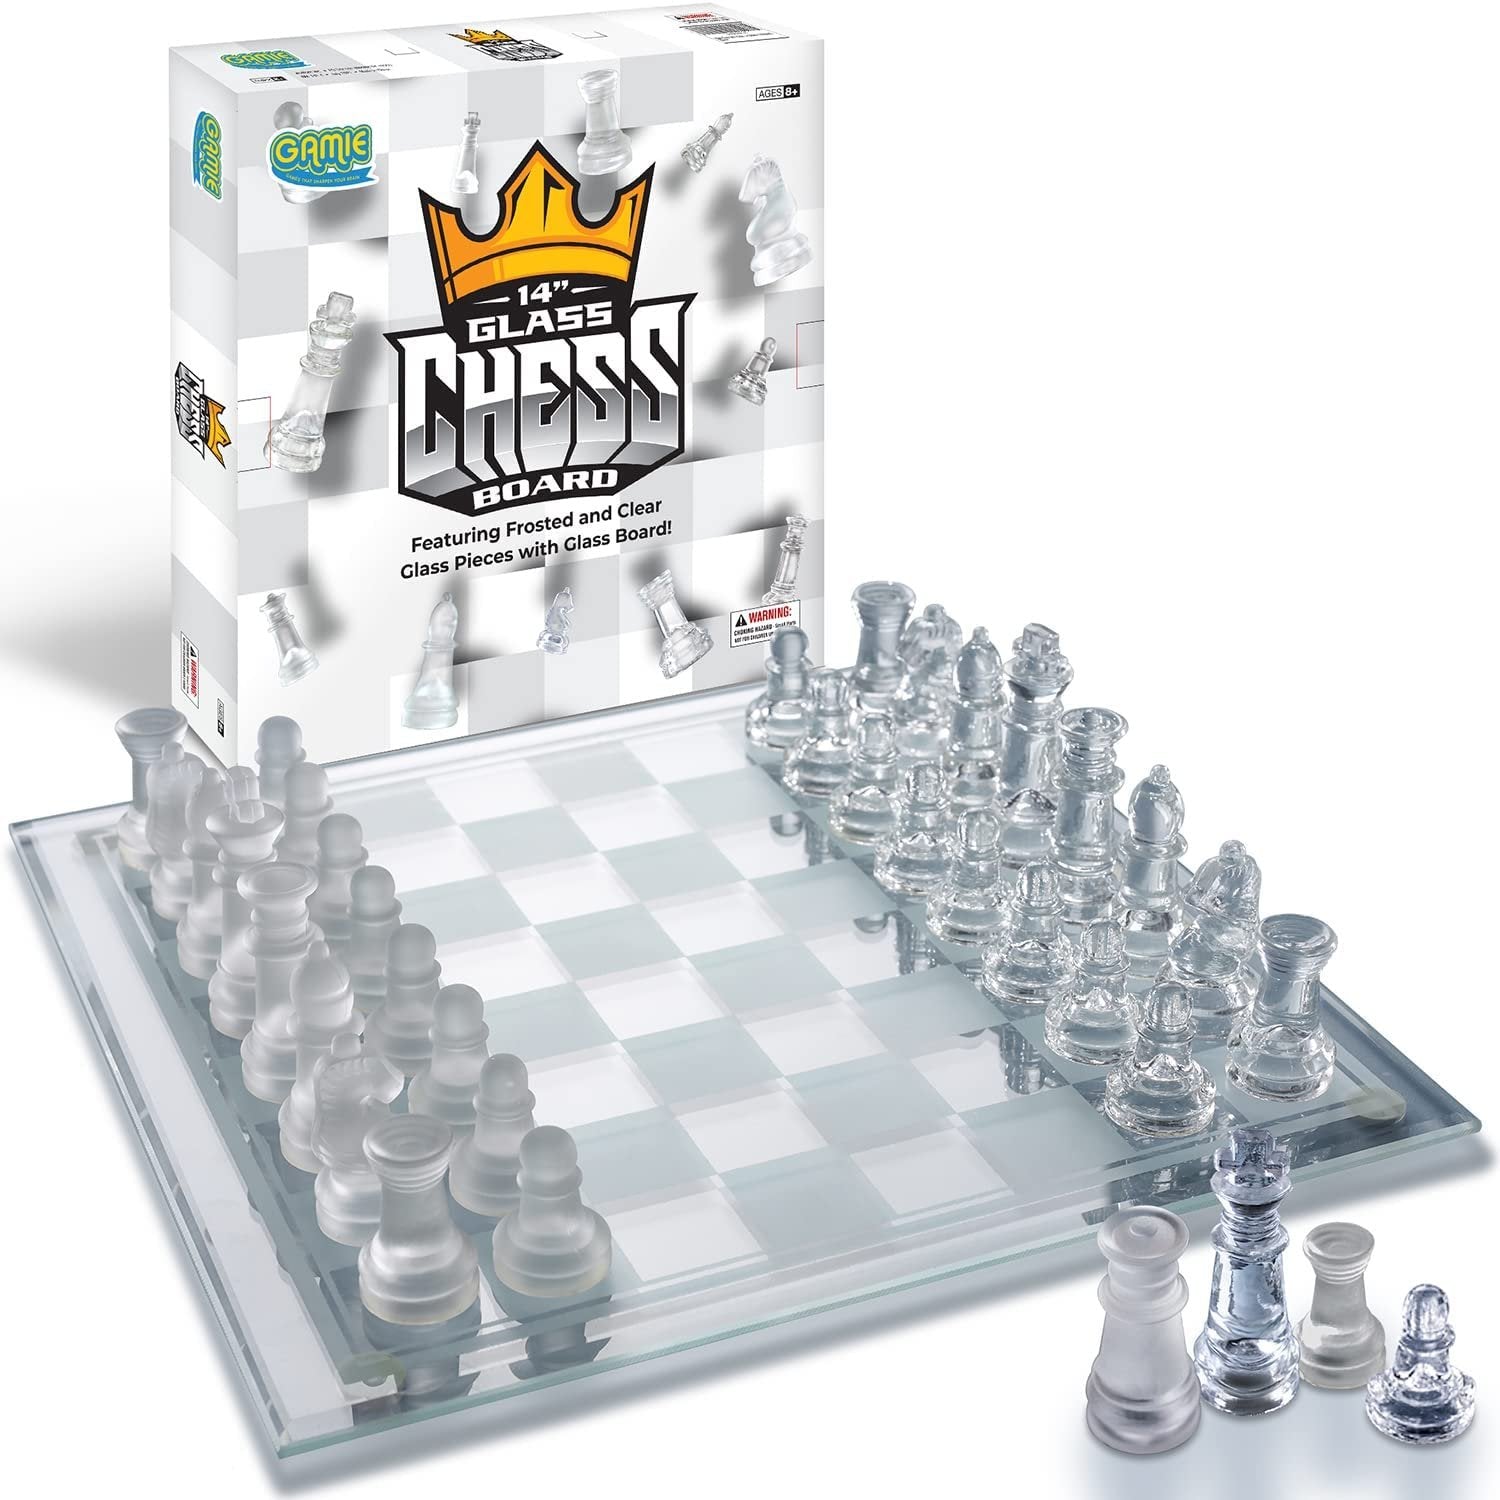 Gamie Glass Chess Set, Elegant Design - Durable Build - Fully Functional - 32 Frosted and Clear Pieces - Felted Bottoms - Easy to Carry - Reassuringly Stable (14